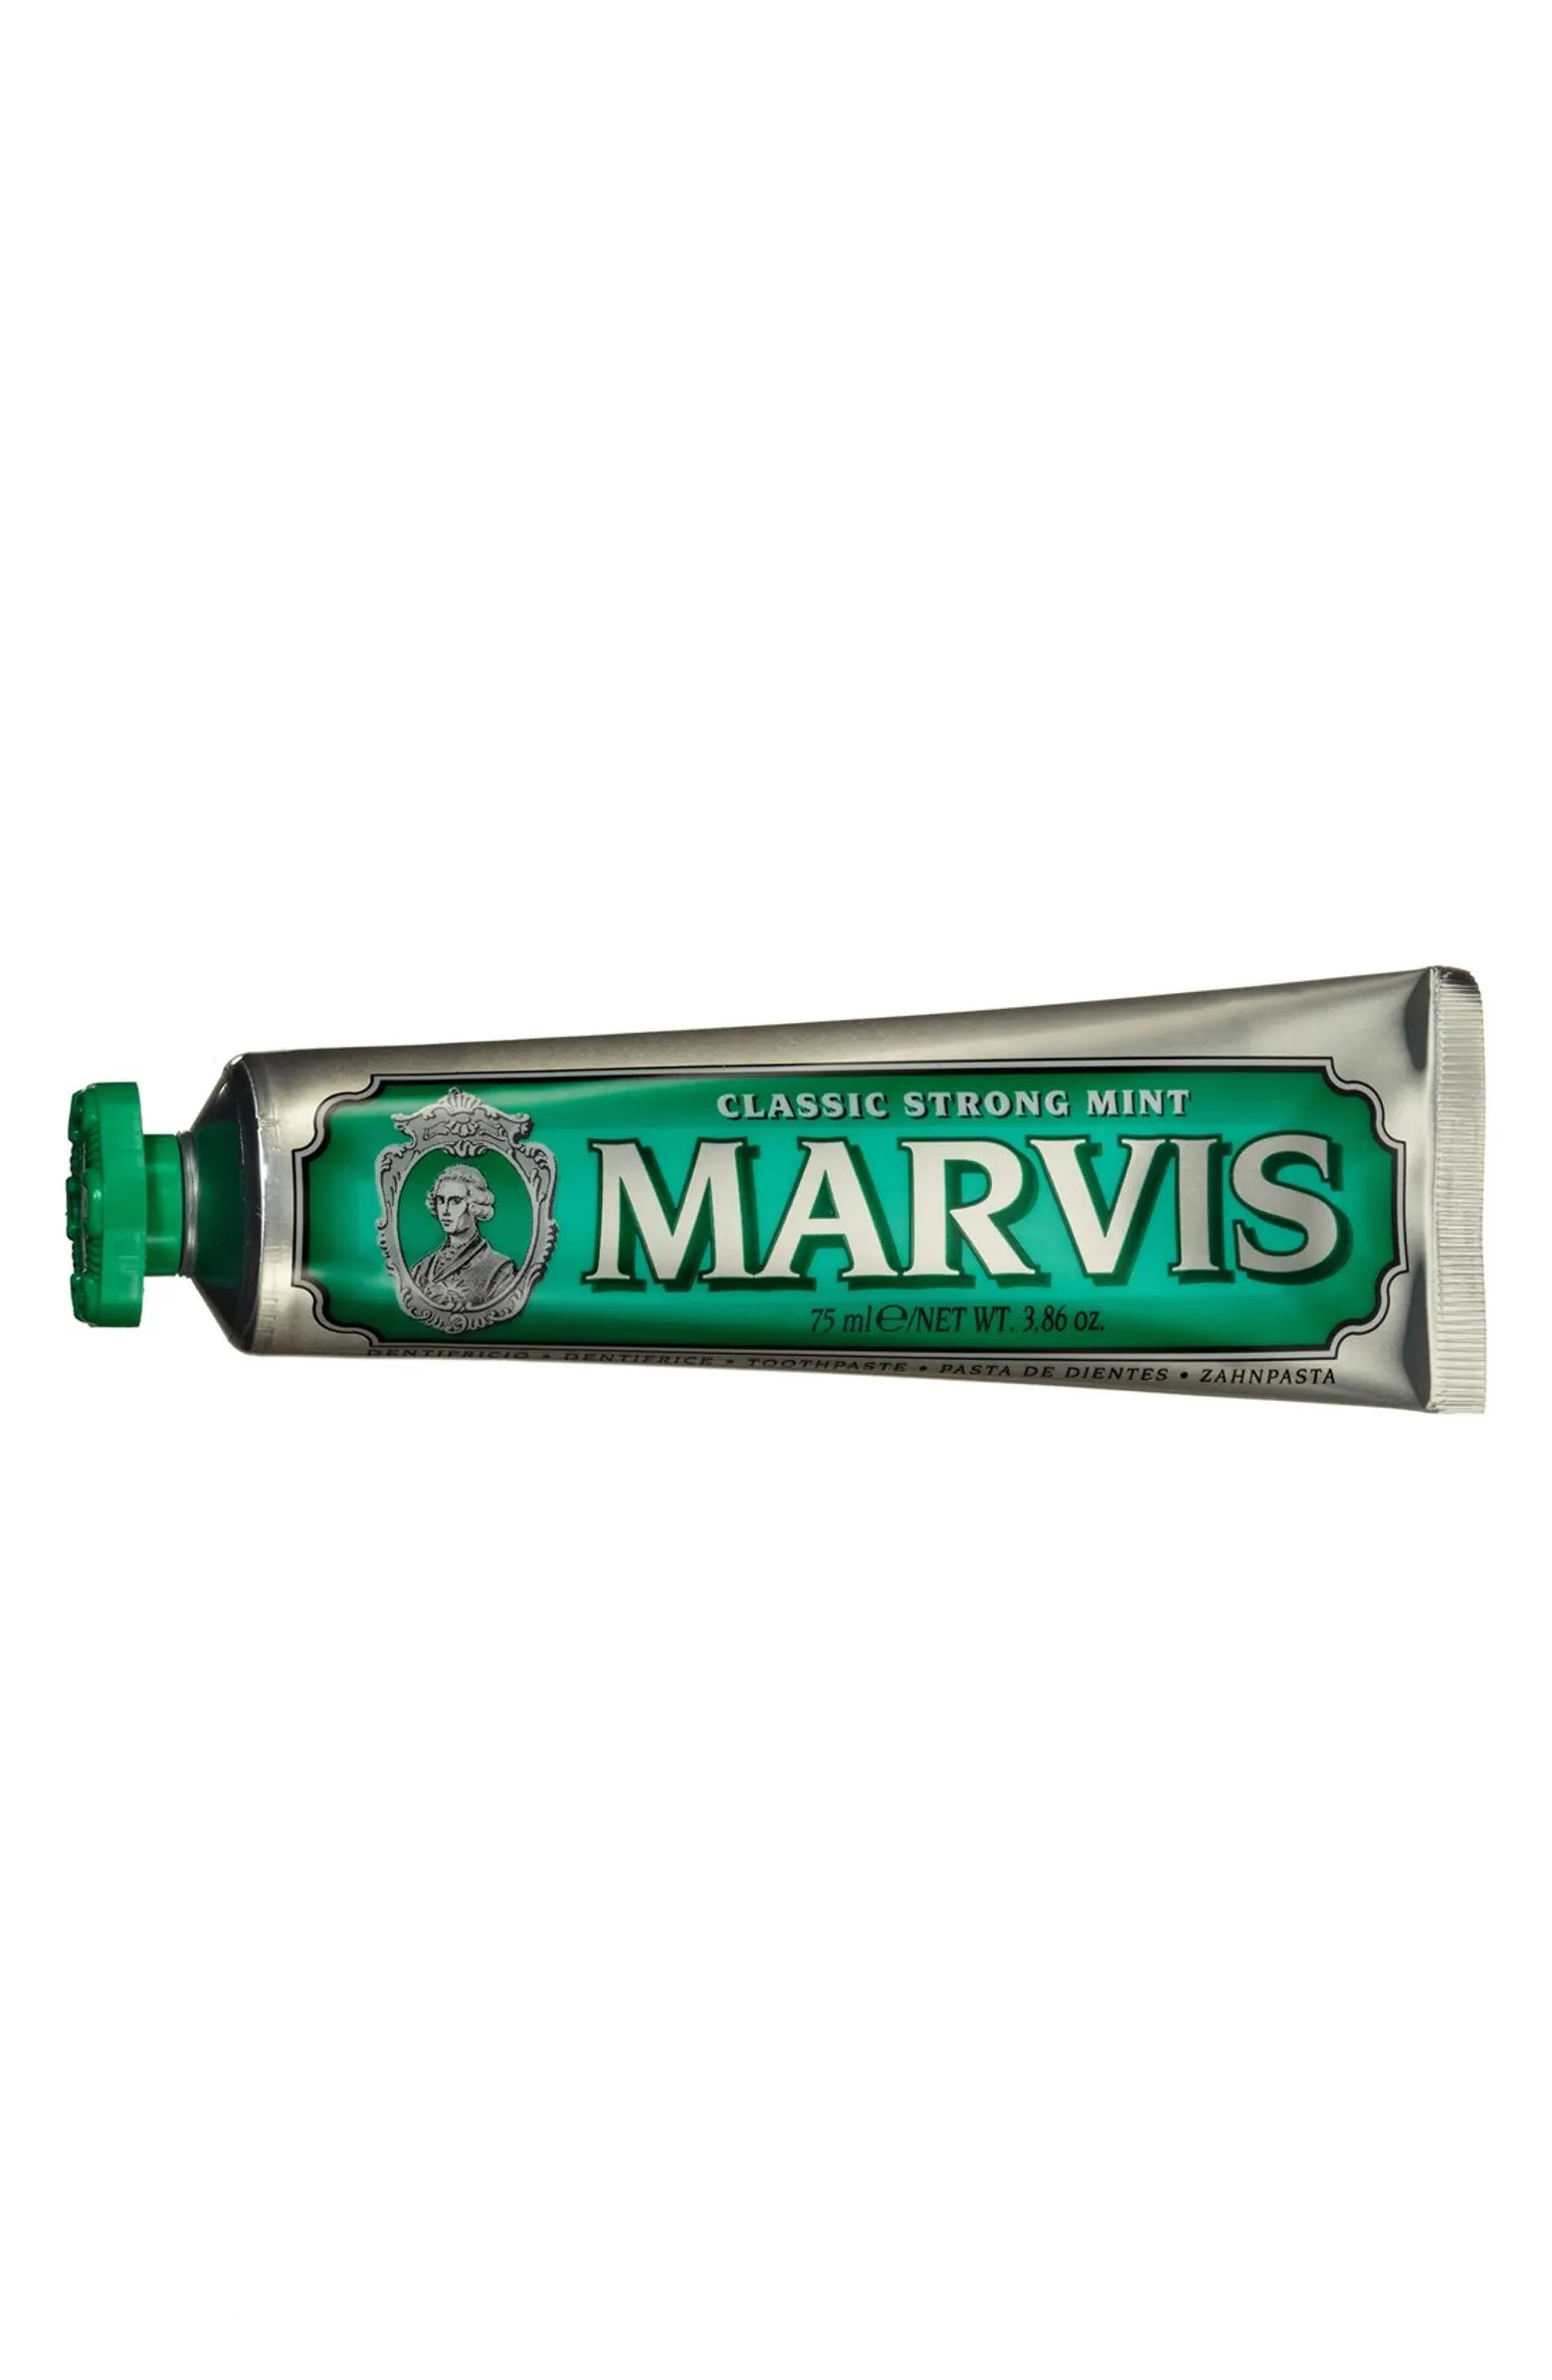 Marvis Mint Toothpaste | Nordstrom